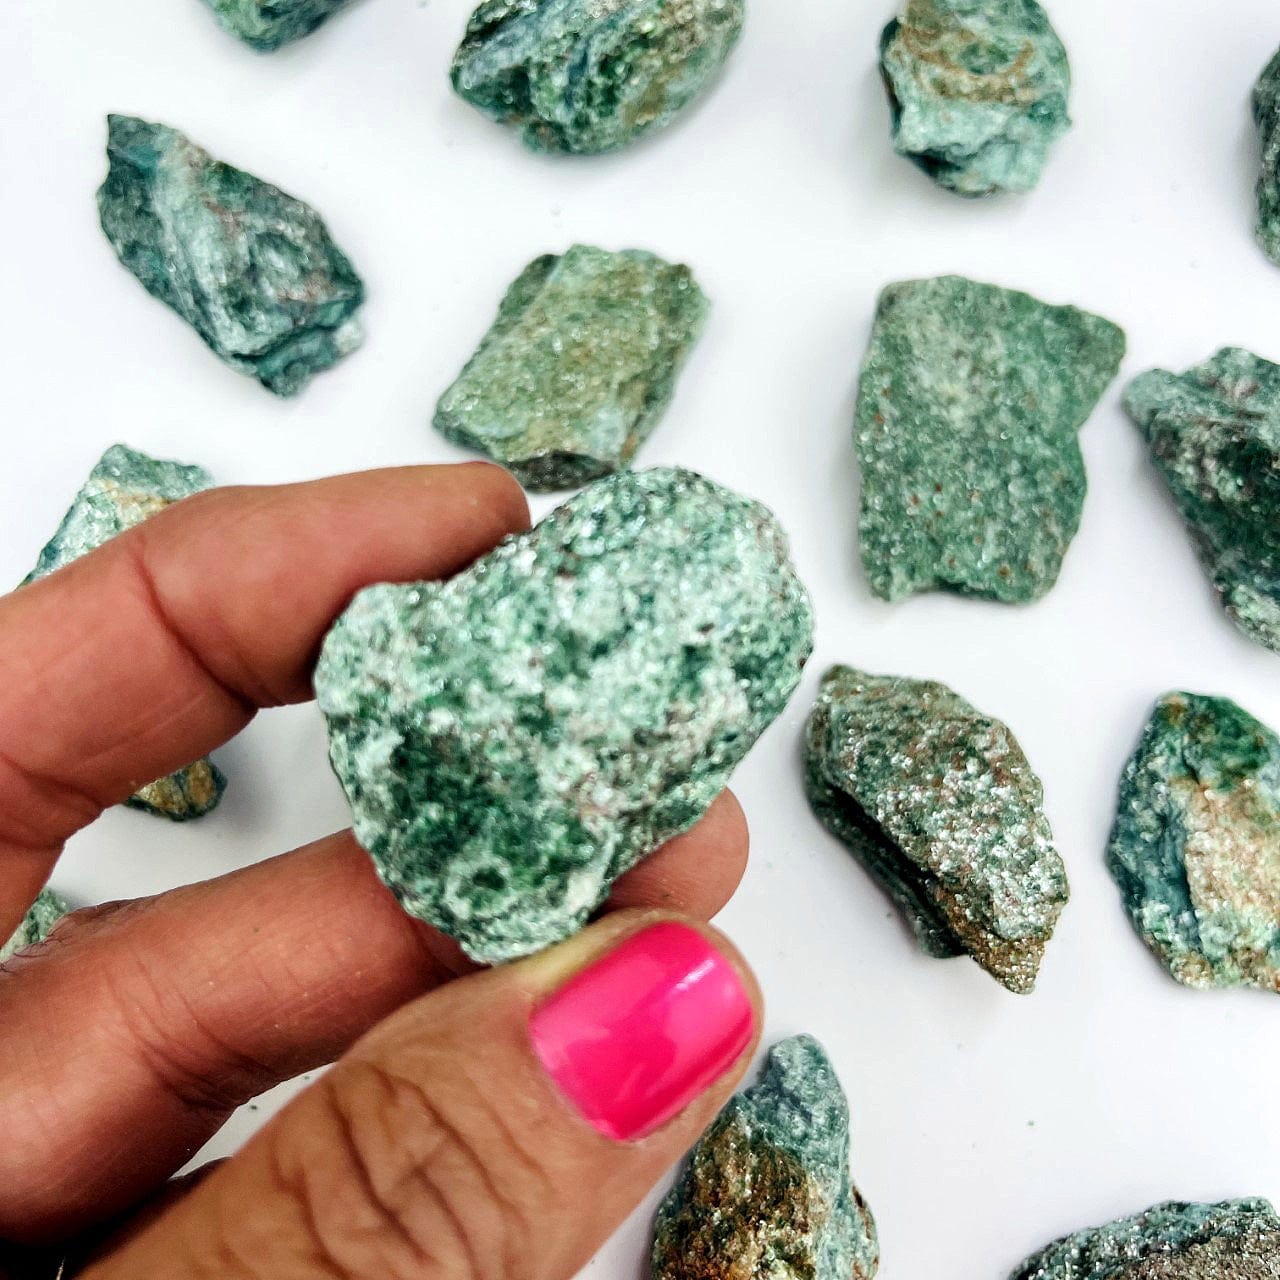 Fuchsite Natural Stone in a hand and other stones behind